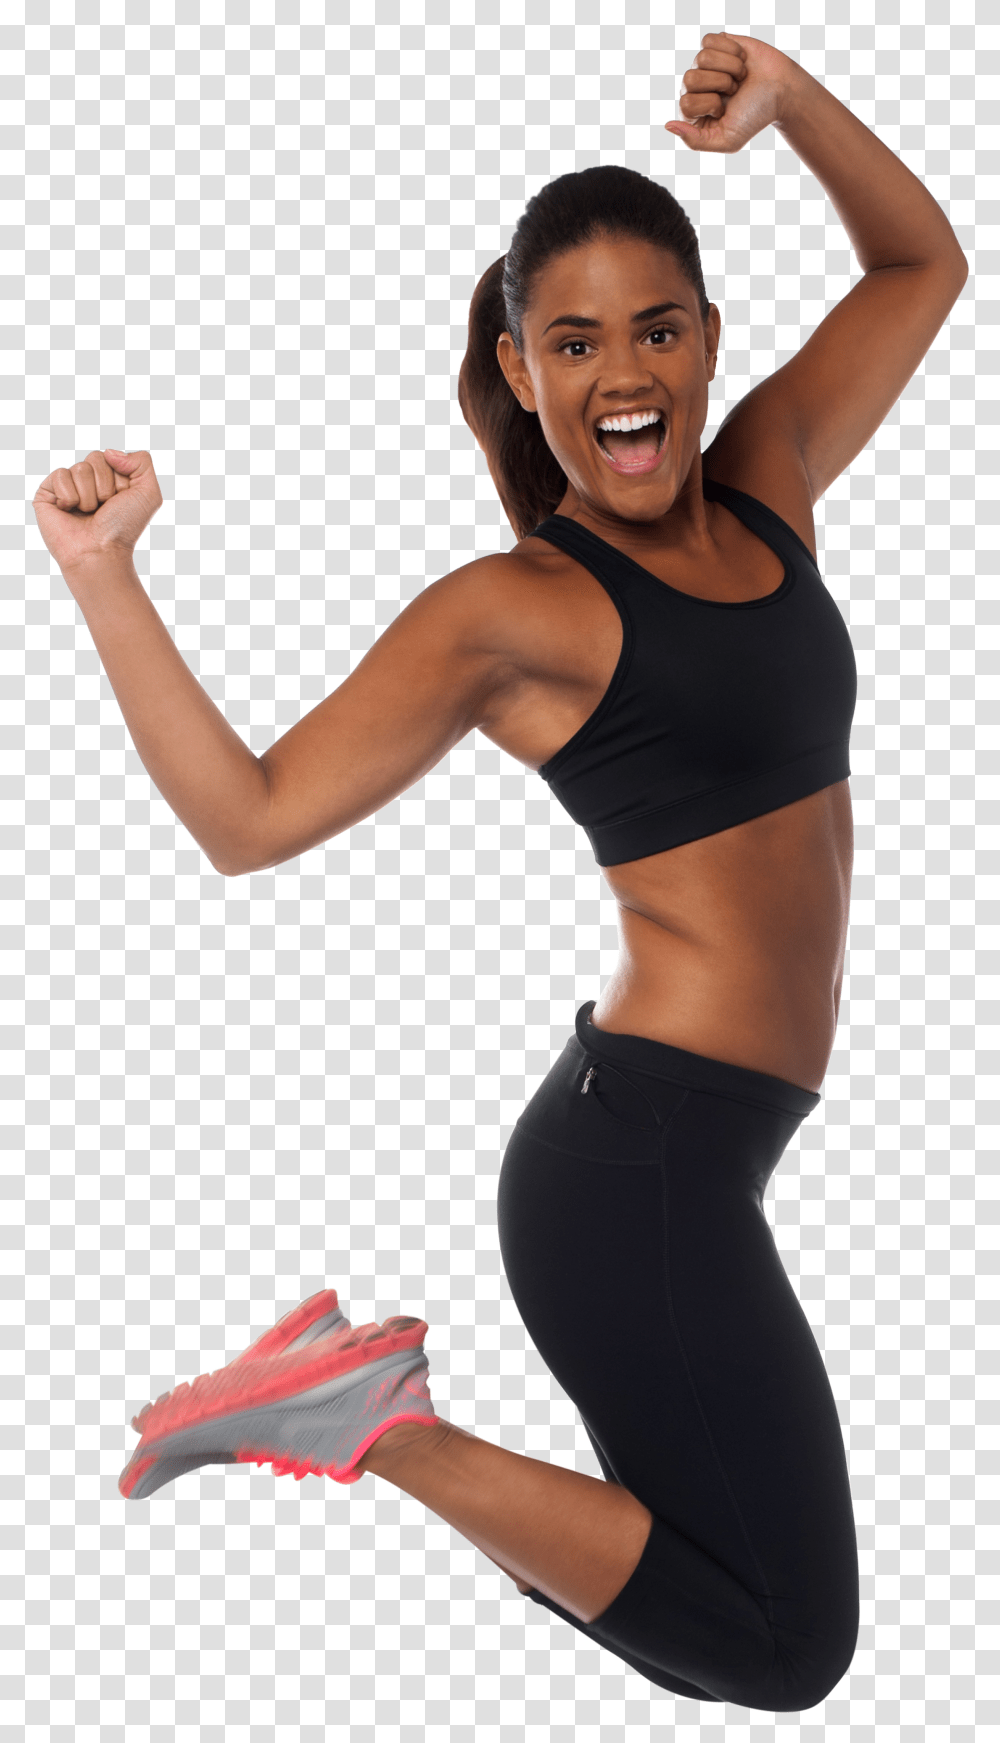 Girl Dancing Jumping Woman No Background Transparent Png